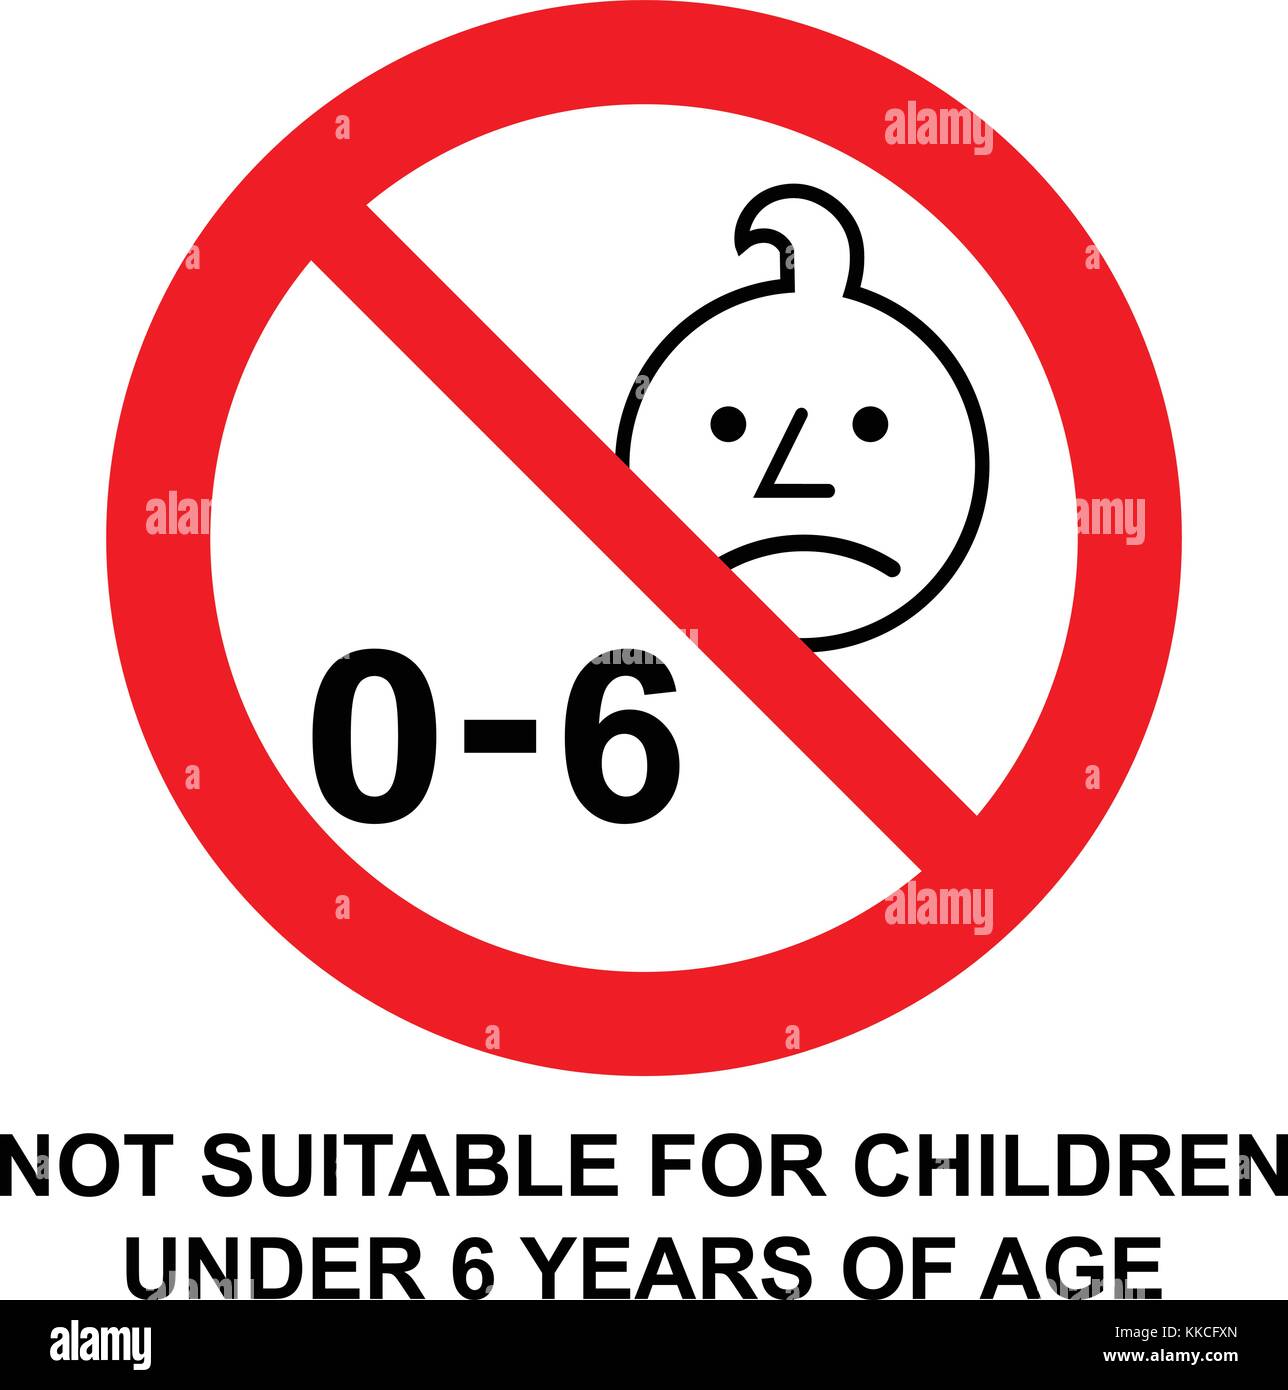 Not suitable for children under 6 years